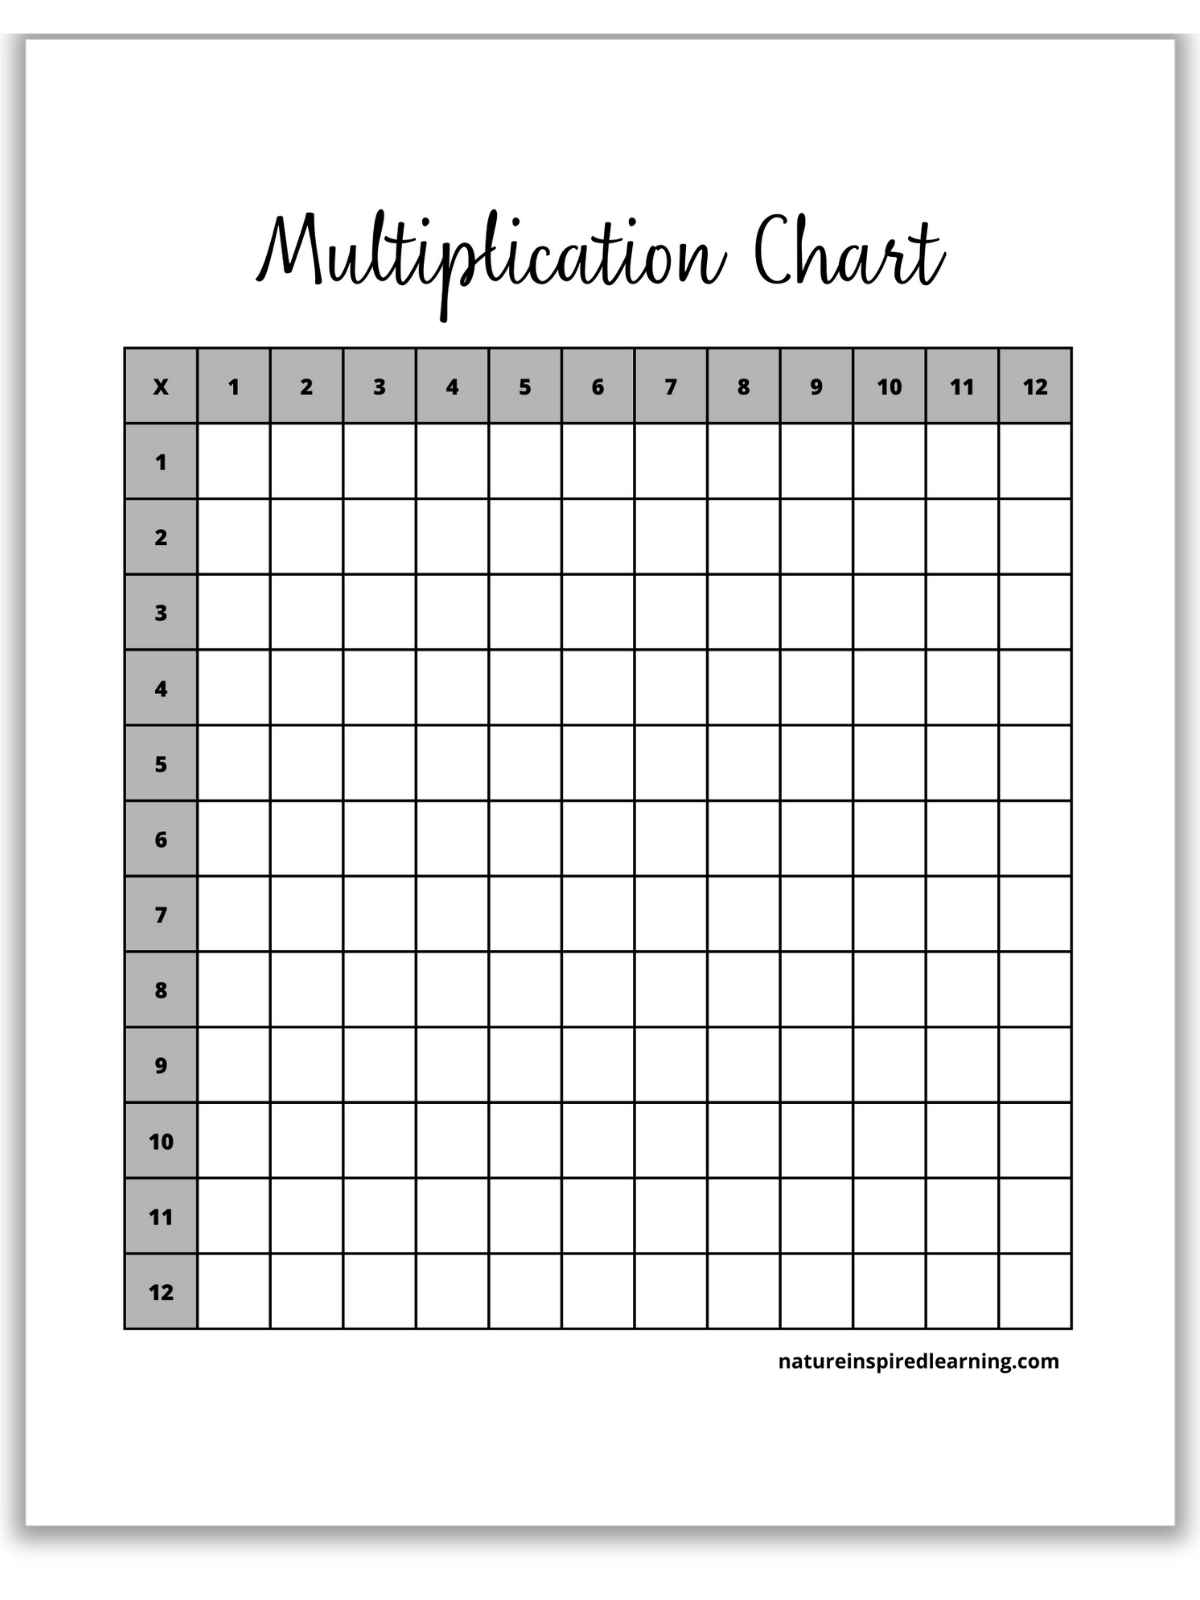 blank multiplication chart with gray boxes with numbers 1 though 12. Cursive text across top.